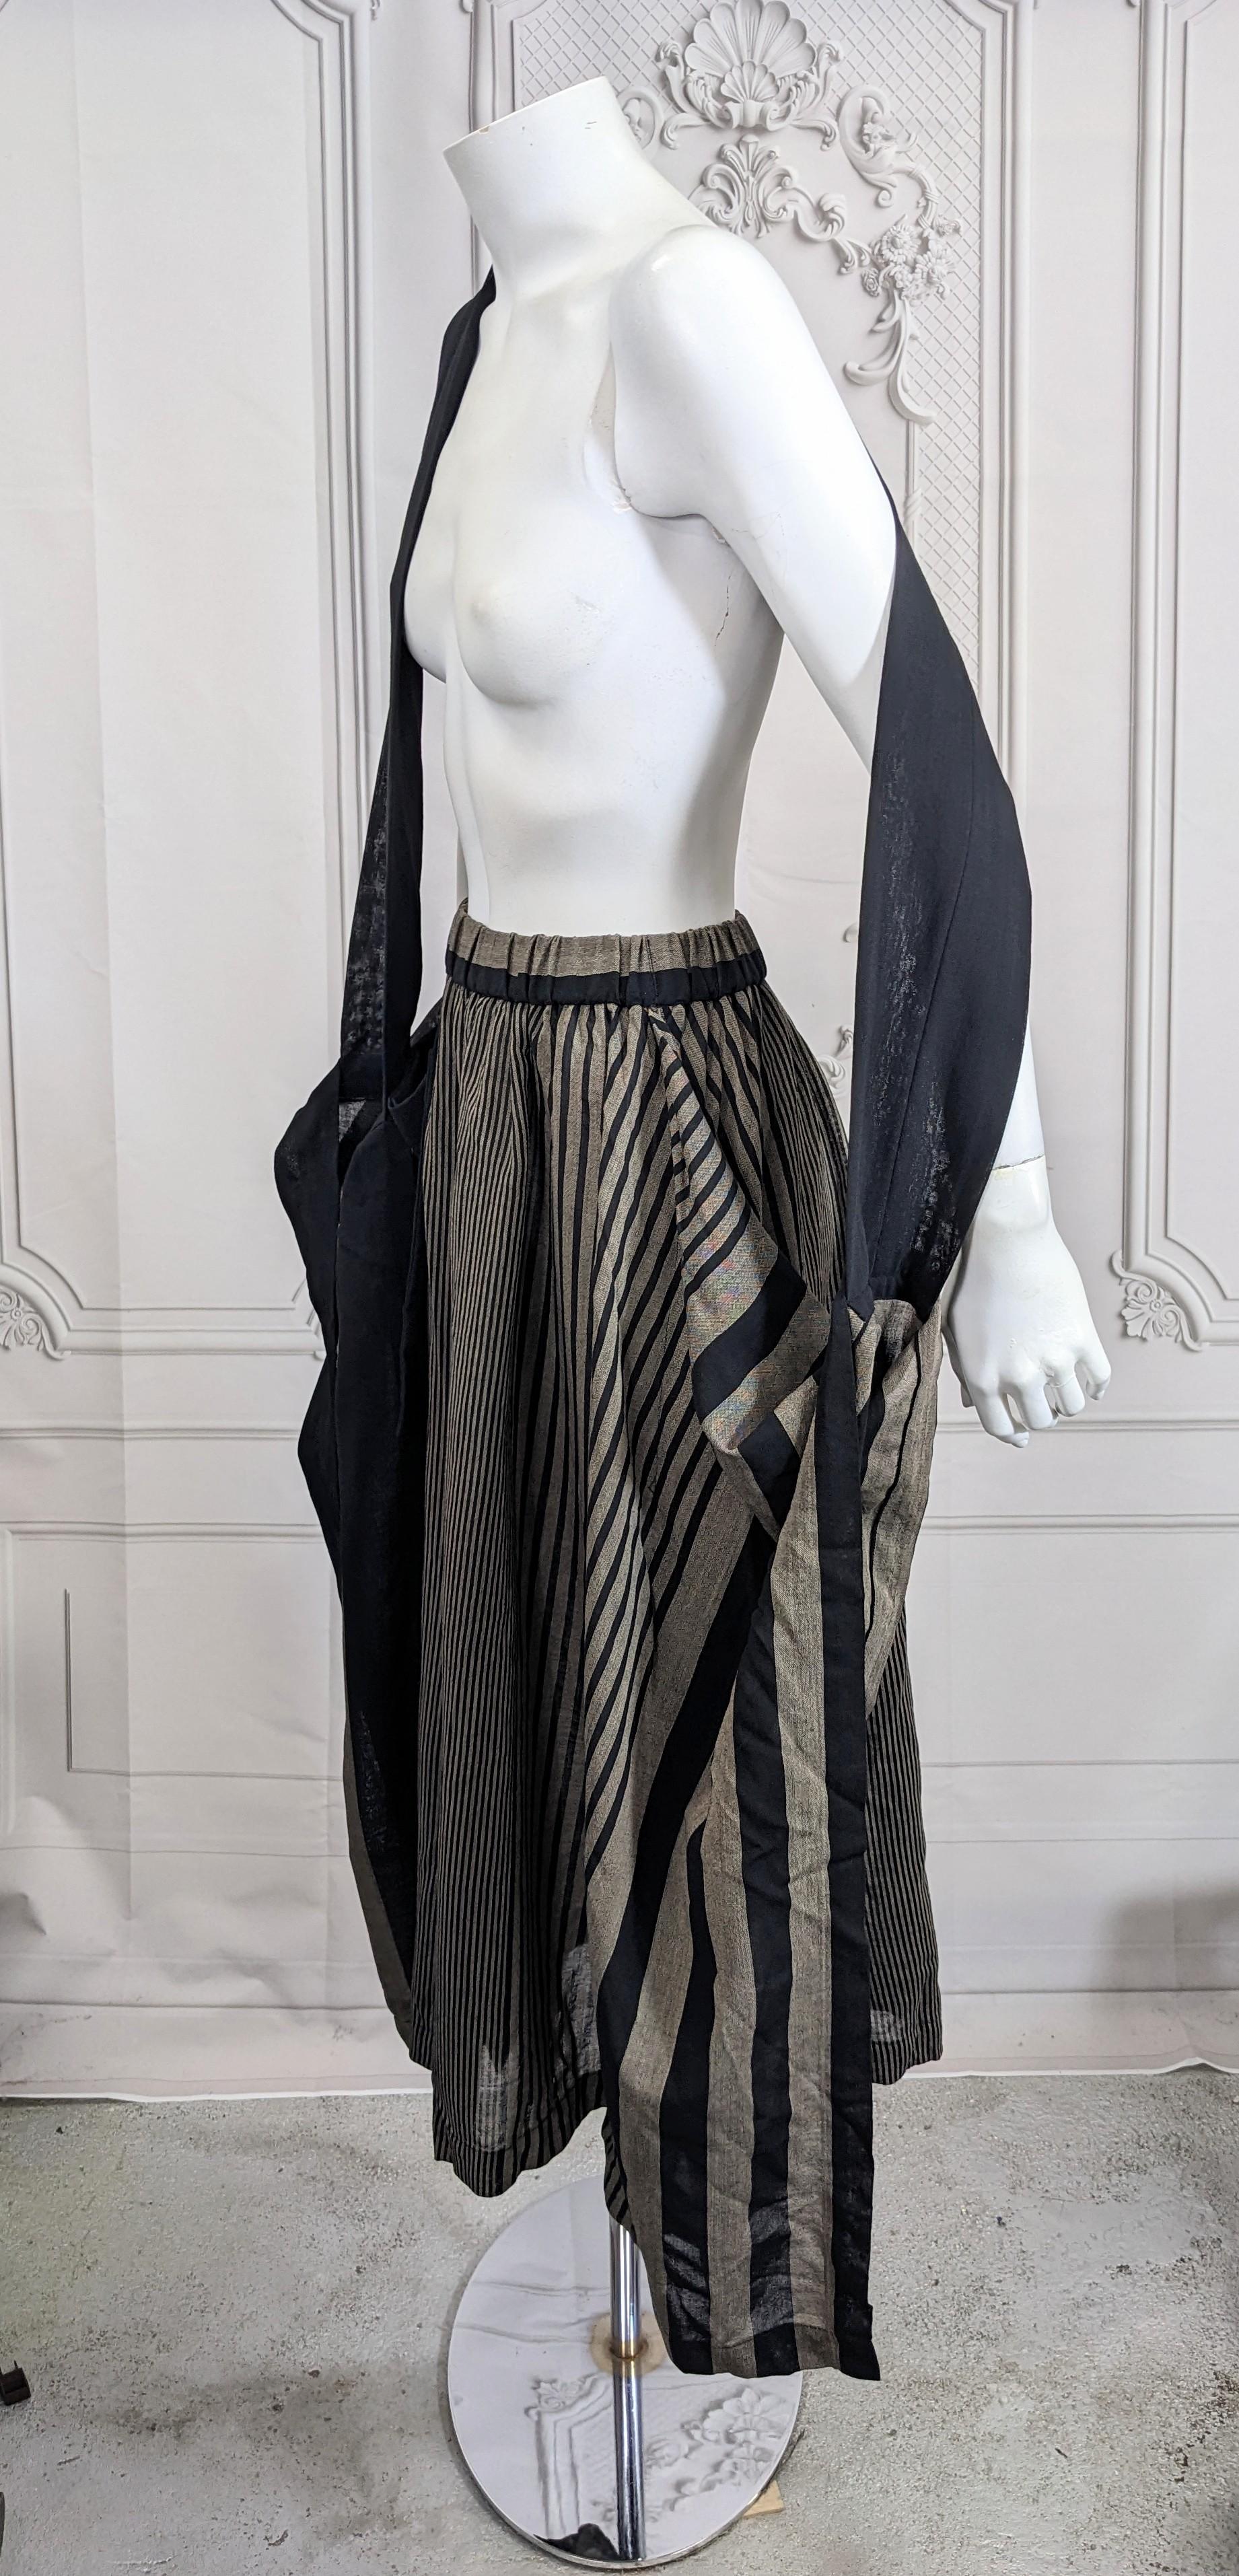 Unusual Issey Miyake Striped Wool Transformable Skirt with attached strap to use as desired. The skirt is basically a doubled over rectangle with a hole at center for waist. There is a wide black wool strap is attached to each end of the fold